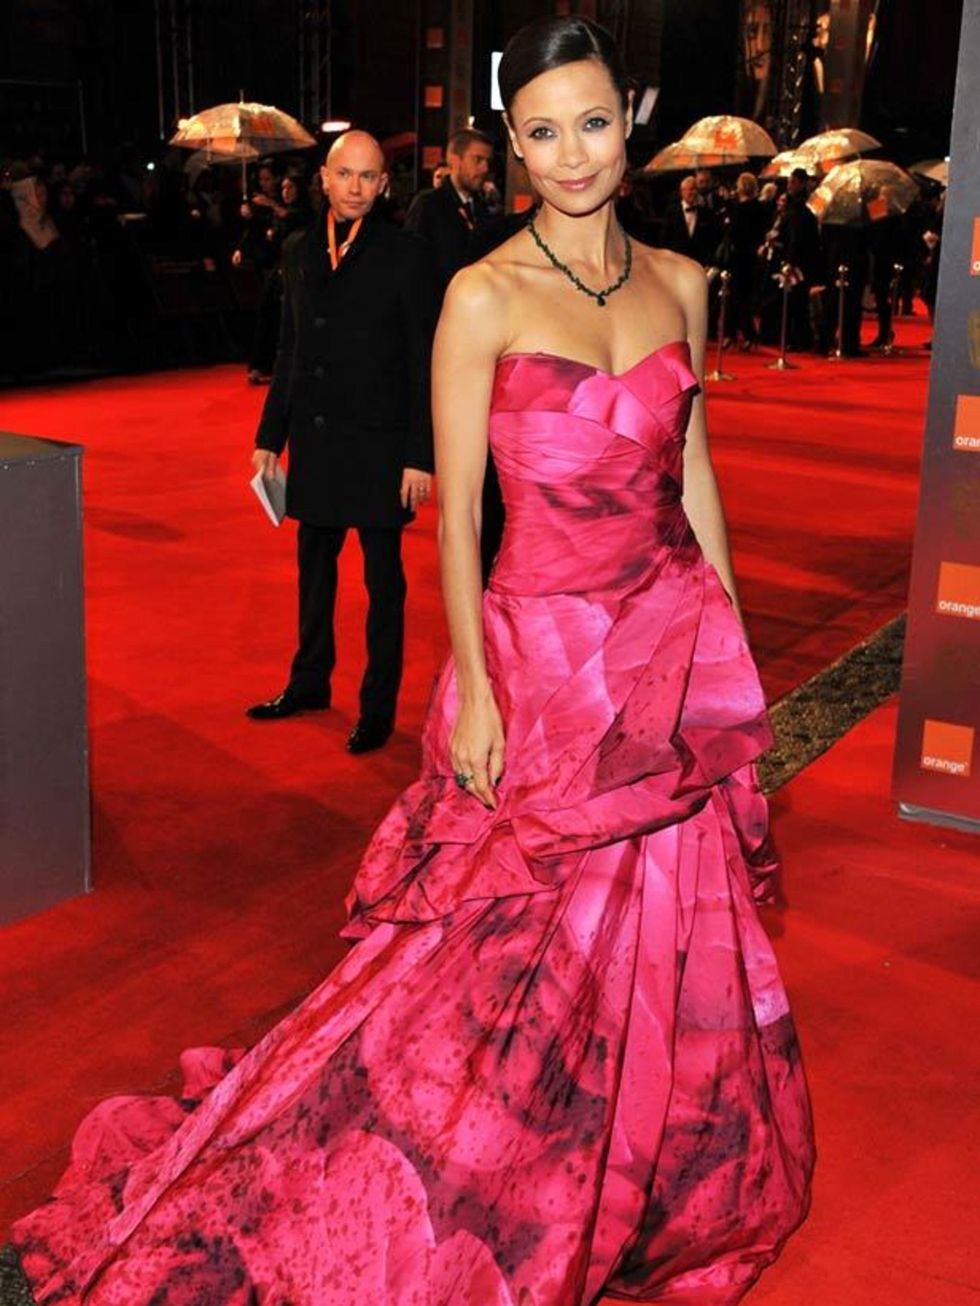 <p><a href="http://www.elleuk.com/starstyle/style-files/%28section%29/Thandie-Newton/%28offset%29/0/%28img%29/140274">Thandie Newton</a> in <a href="http://www.elleuk.com/catwalk/collections/monique-lhullier/spring-summer-2011/collection">Monique Lhuillie